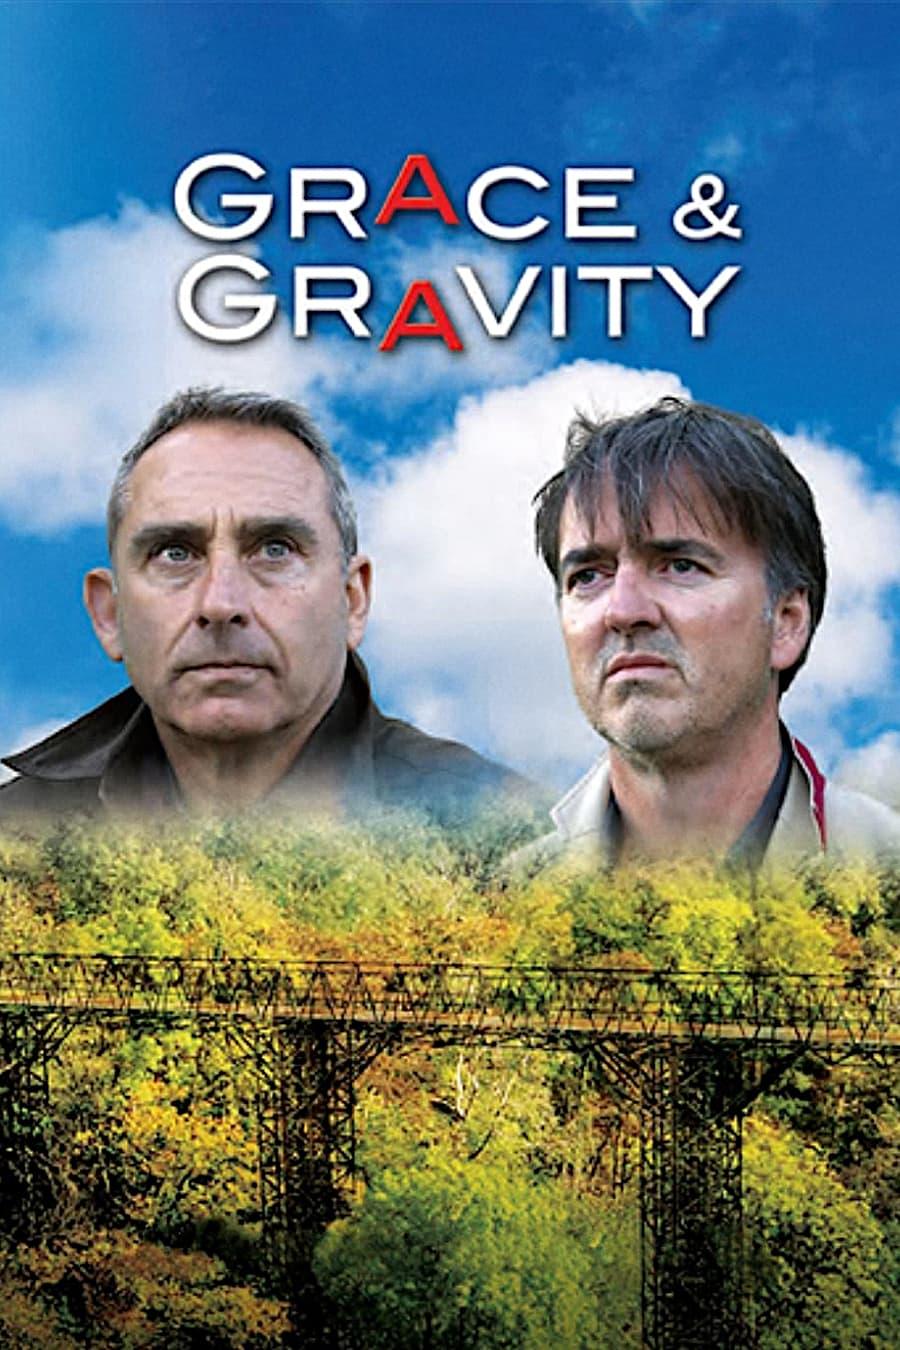 Grace and Gravity poster